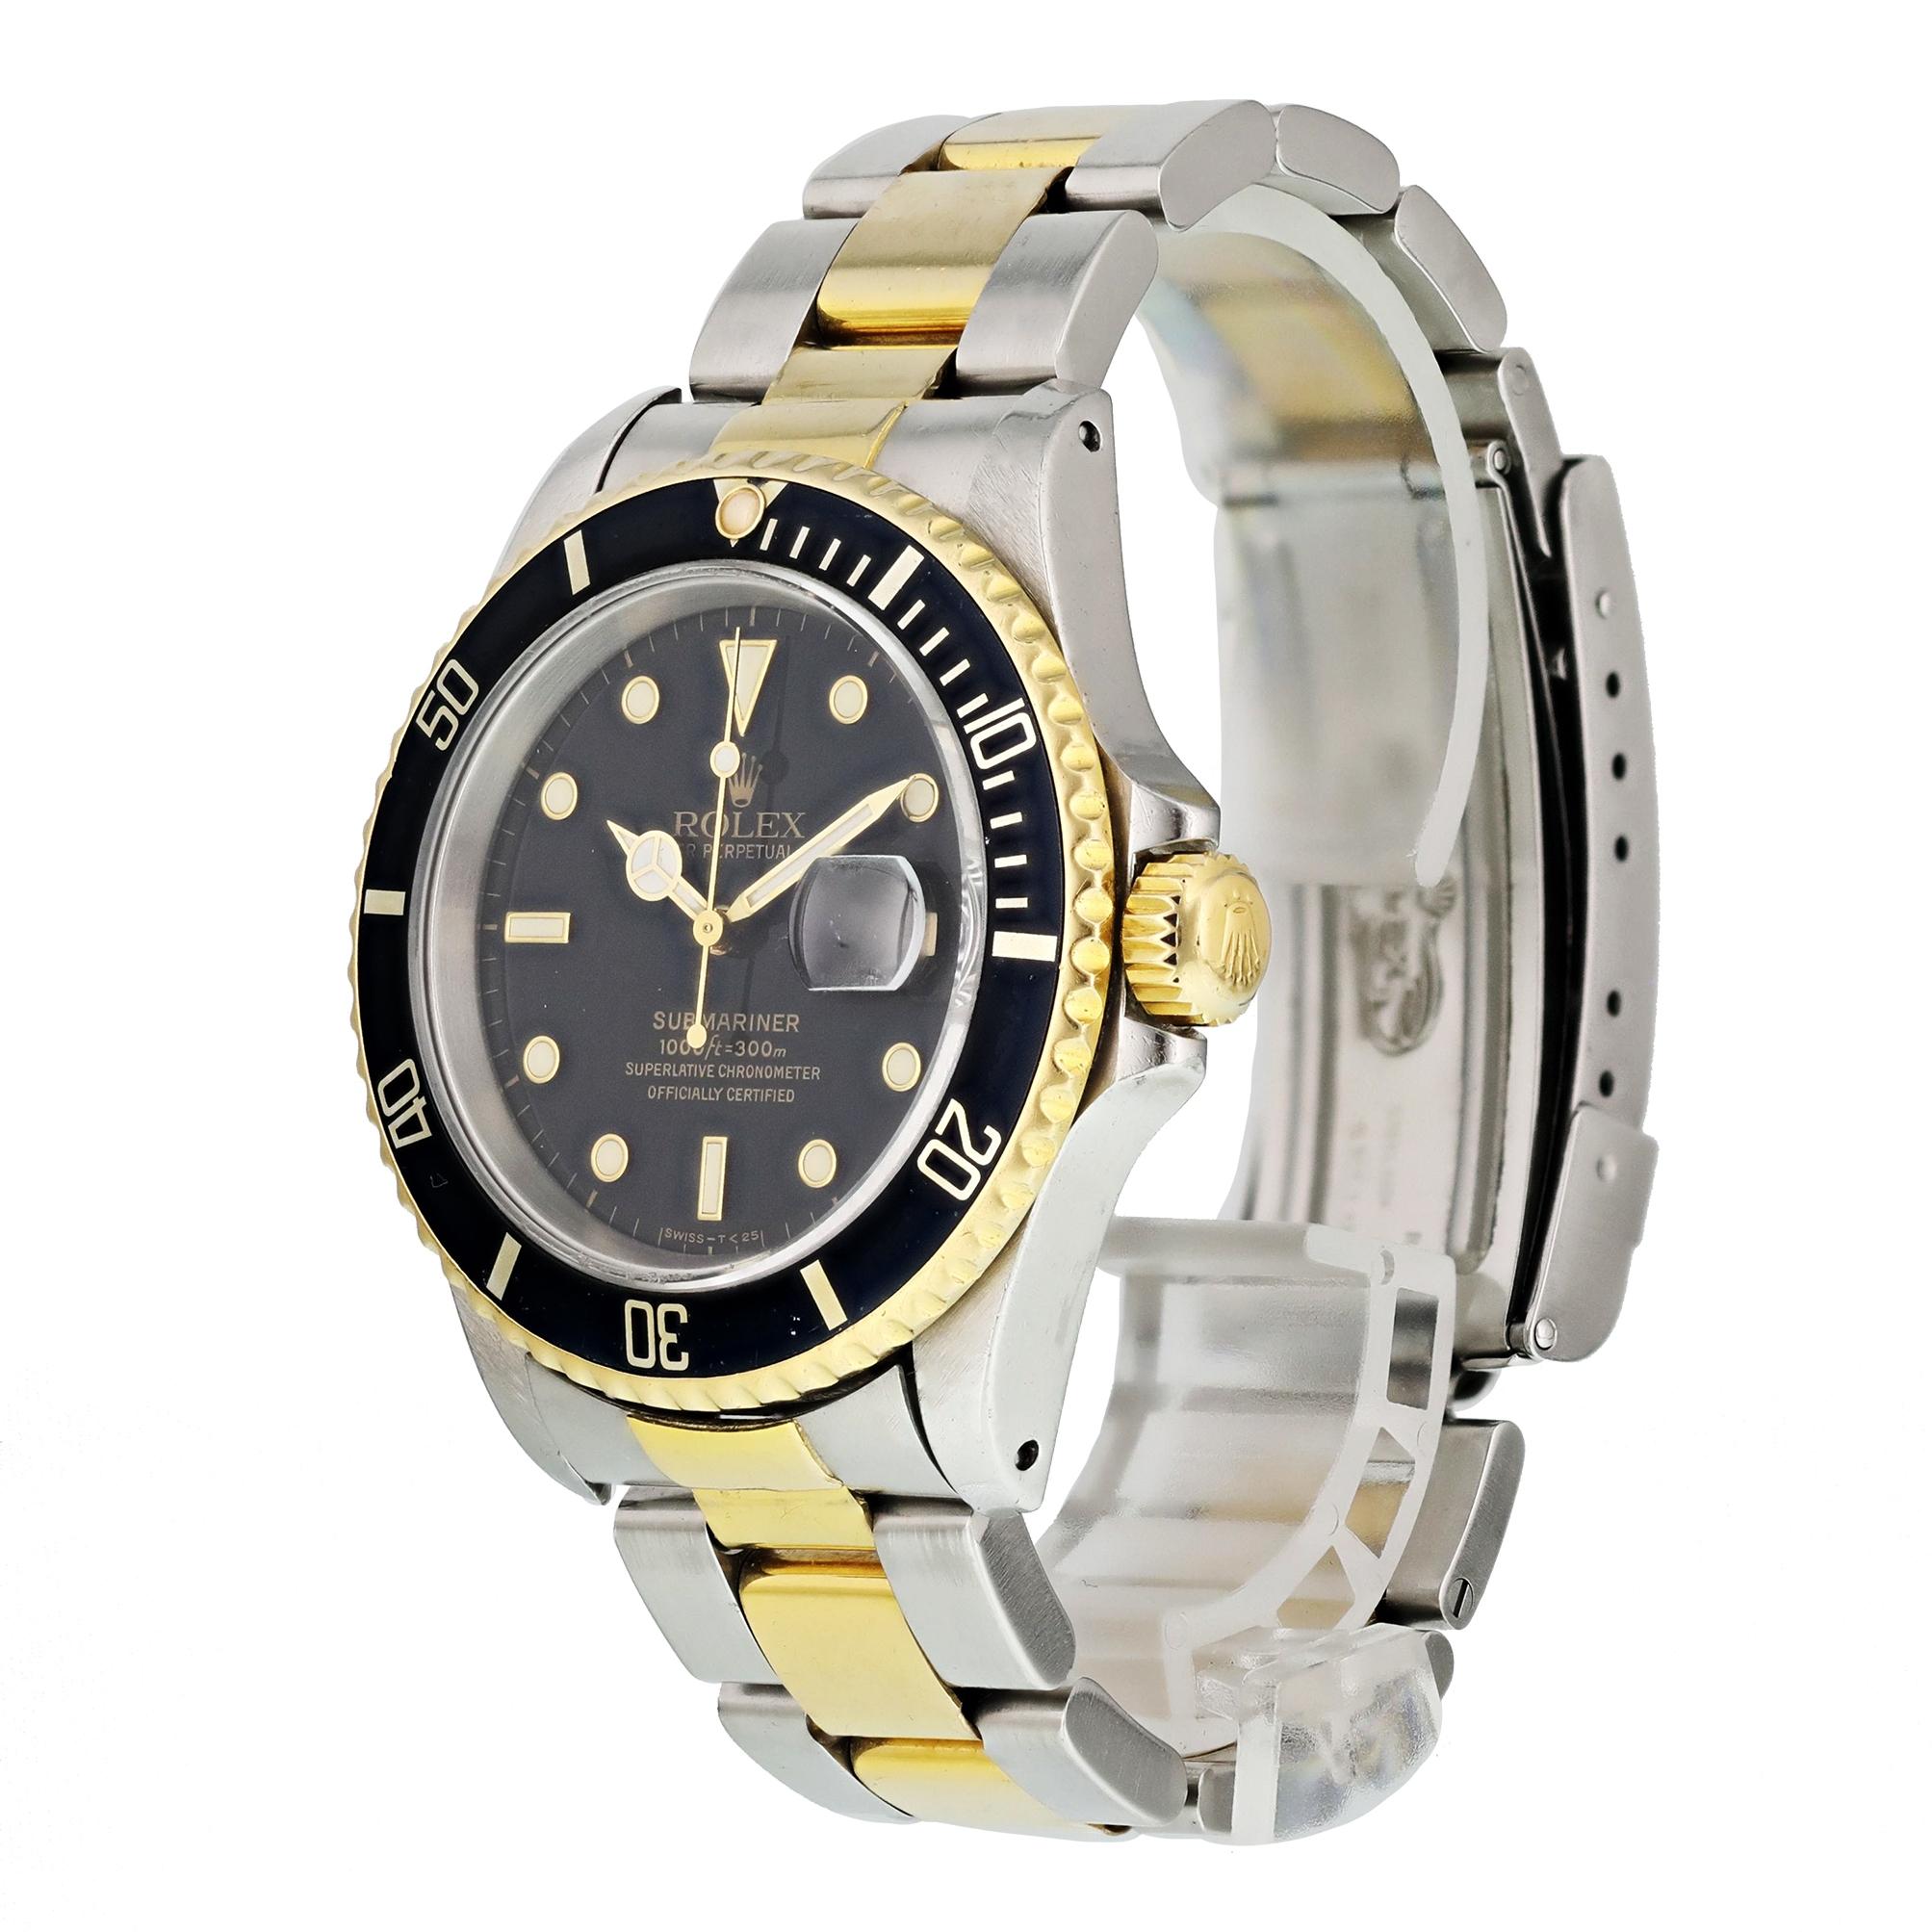 Rolex oyster perpetual Submariner Date 18k 16613 Men's Watch.
40mm Stainless steel case.
18k yellow gold bezel with black bezel insert. 
Black dial with gold luminous hands and markers. 
Minute markers on the outer dial. 
Date display at the 3